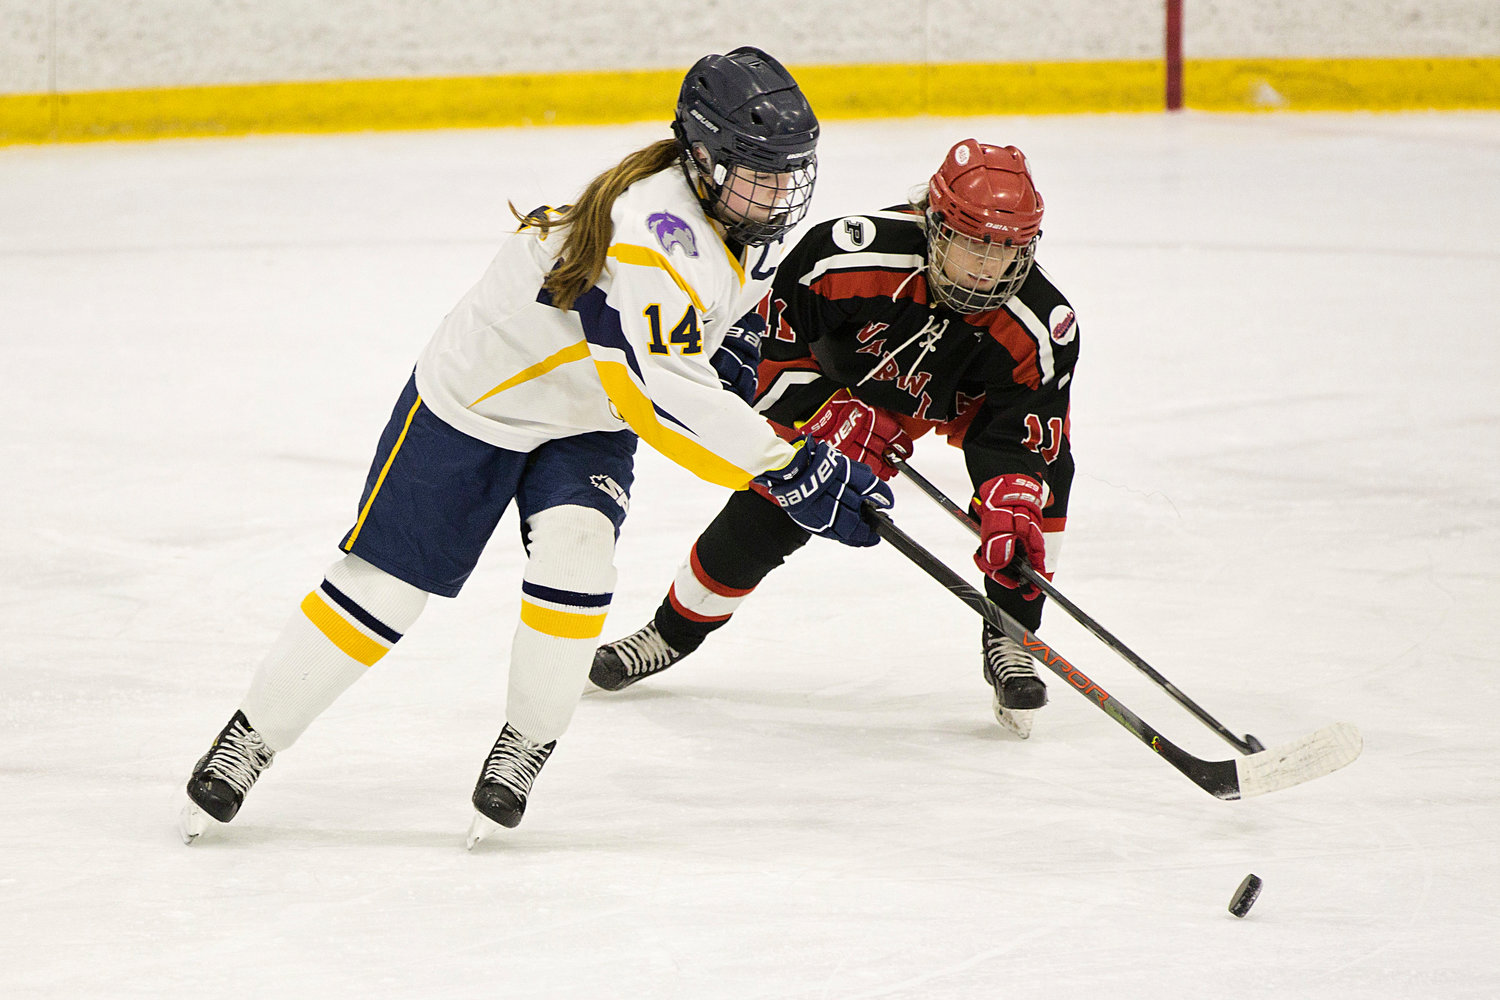 Barrington’s Peyton Whittet battles her opponent for possession of a loose puck.